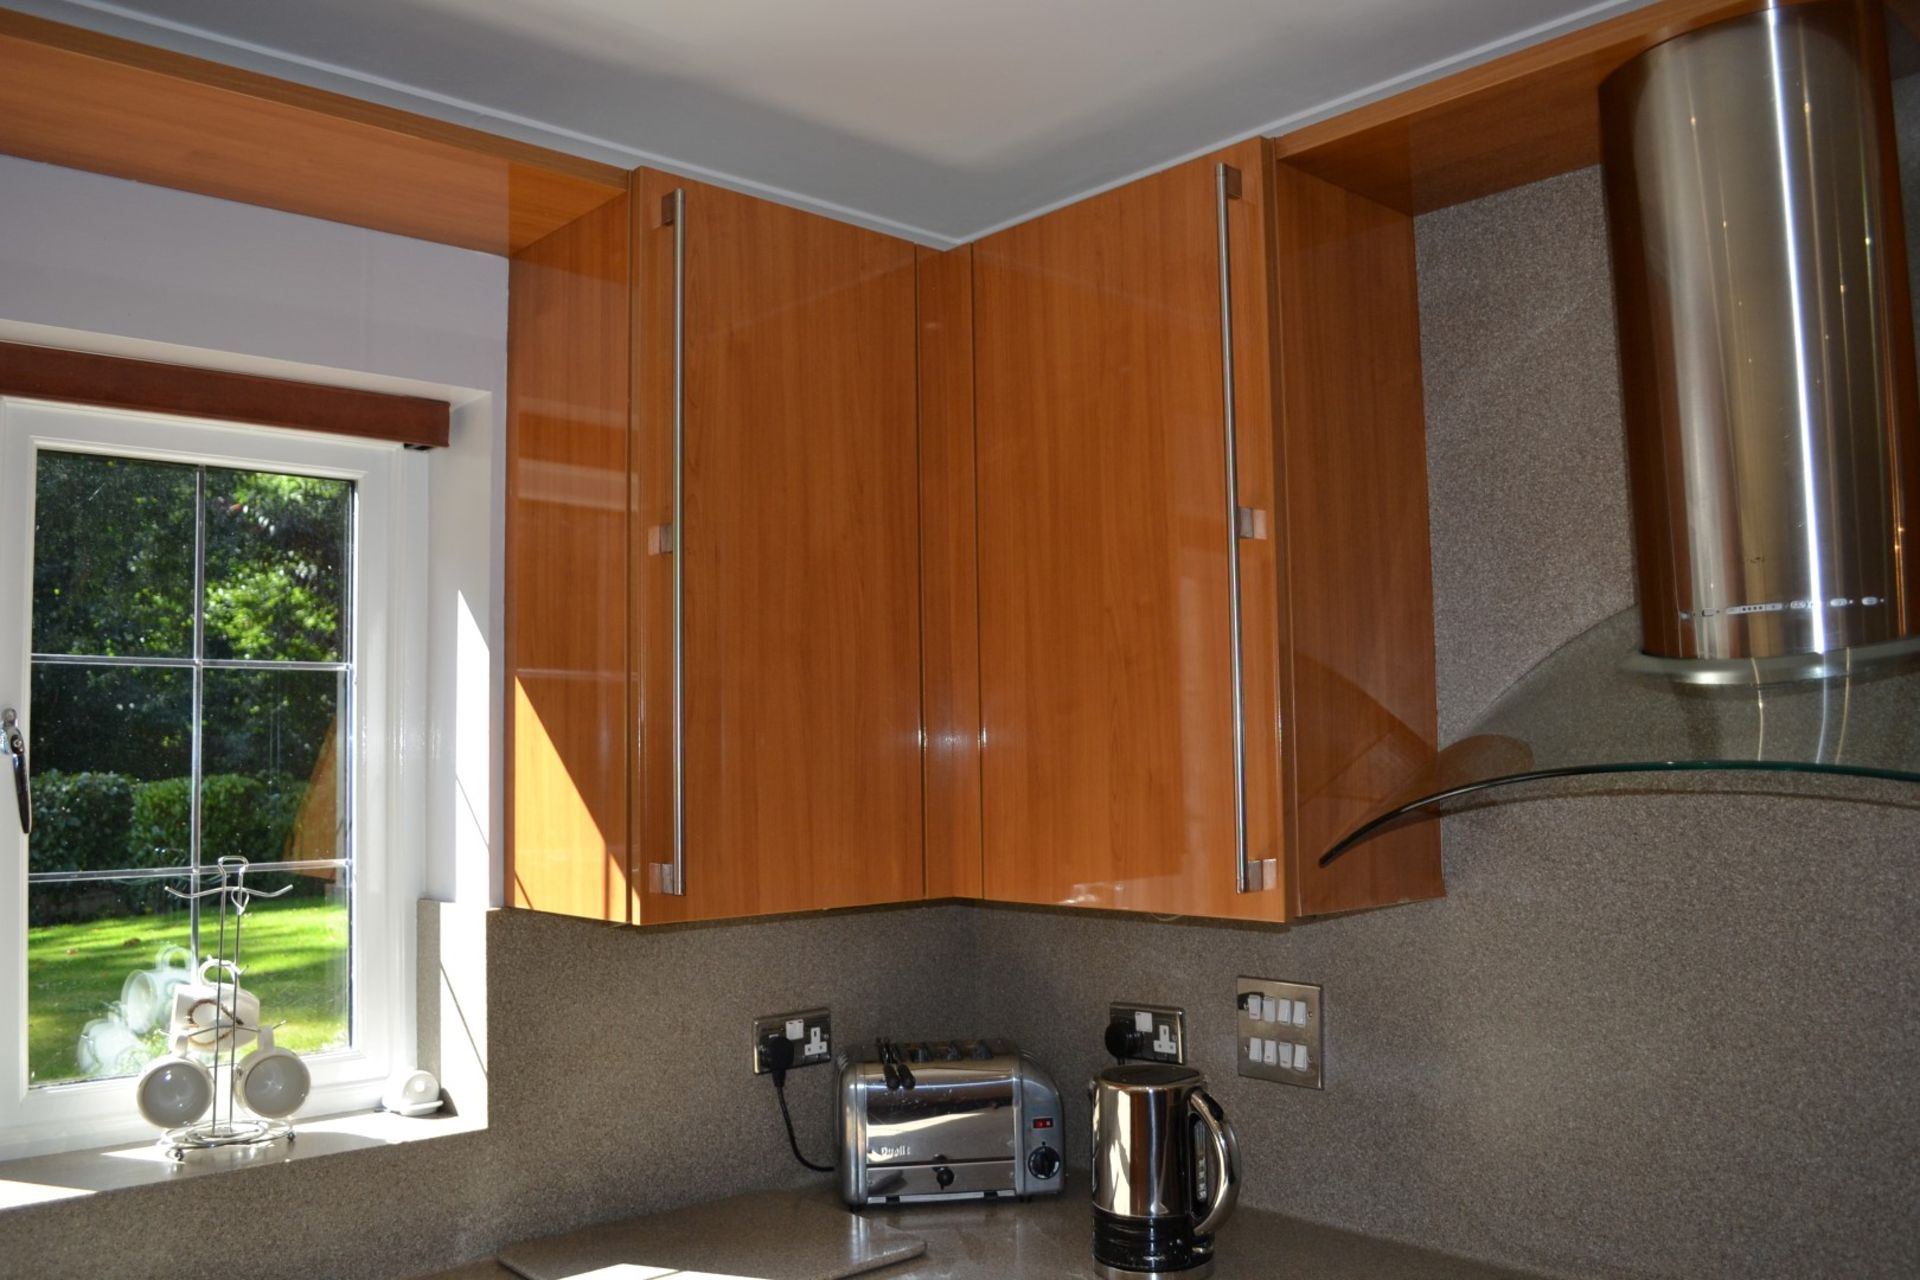 1 x Bespoke Siematic Gloss Fitted Kitchen With Corian Worktops and Frosted Glass Breakfast Bar - - Image 5 of 75